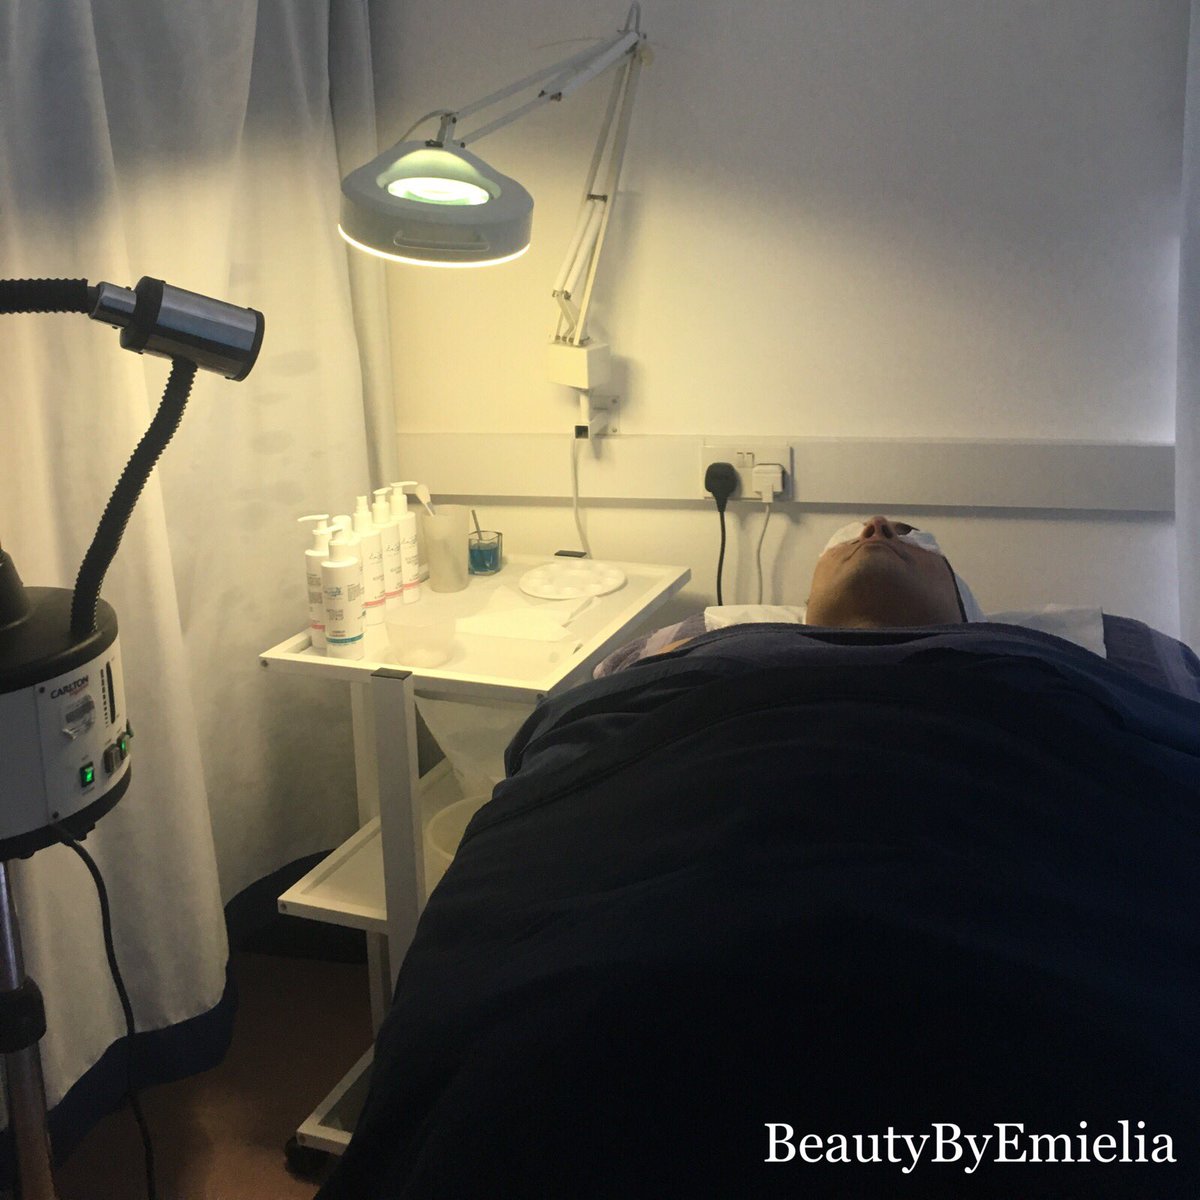 Luxury facial, using Eve Taylor Products. #facial #steamer #relax #love #beauty #evetaylor #beautytherapist #johnandginger #training #brighton